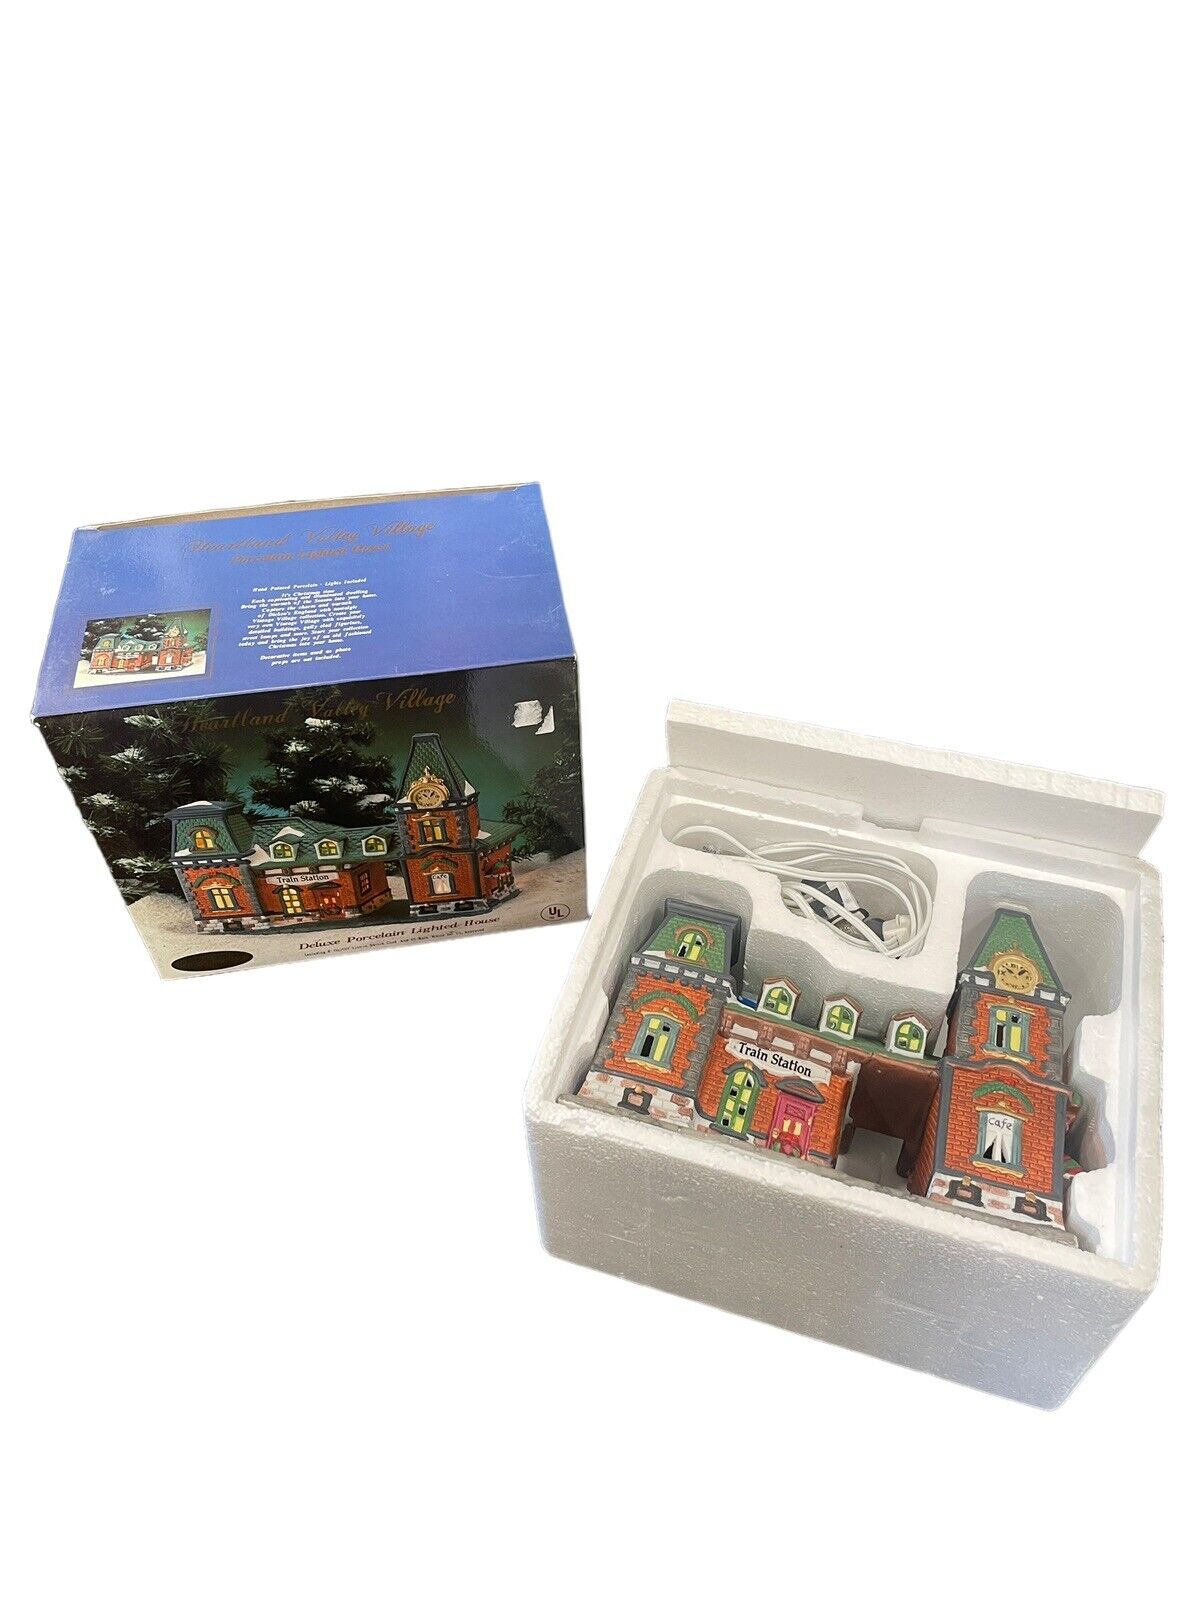 Heartland Valley Village Lighted Train Station & Cafe Deluxe Porcelain Christmas